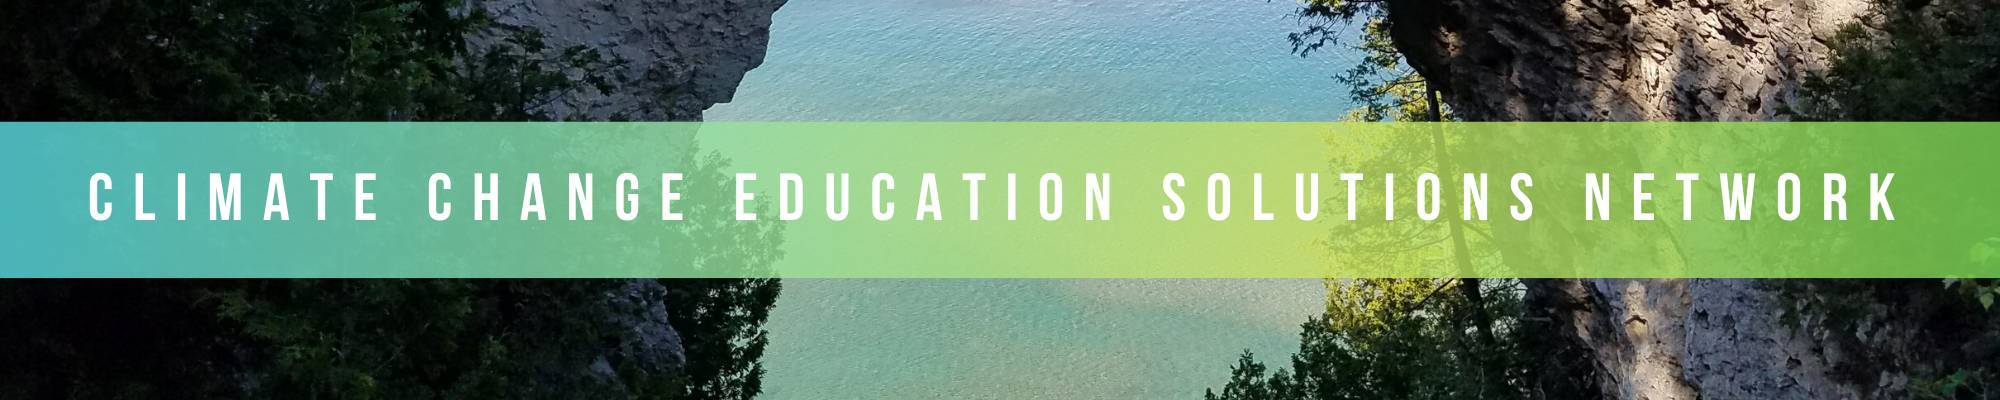 Climate Change Education Solutions Network